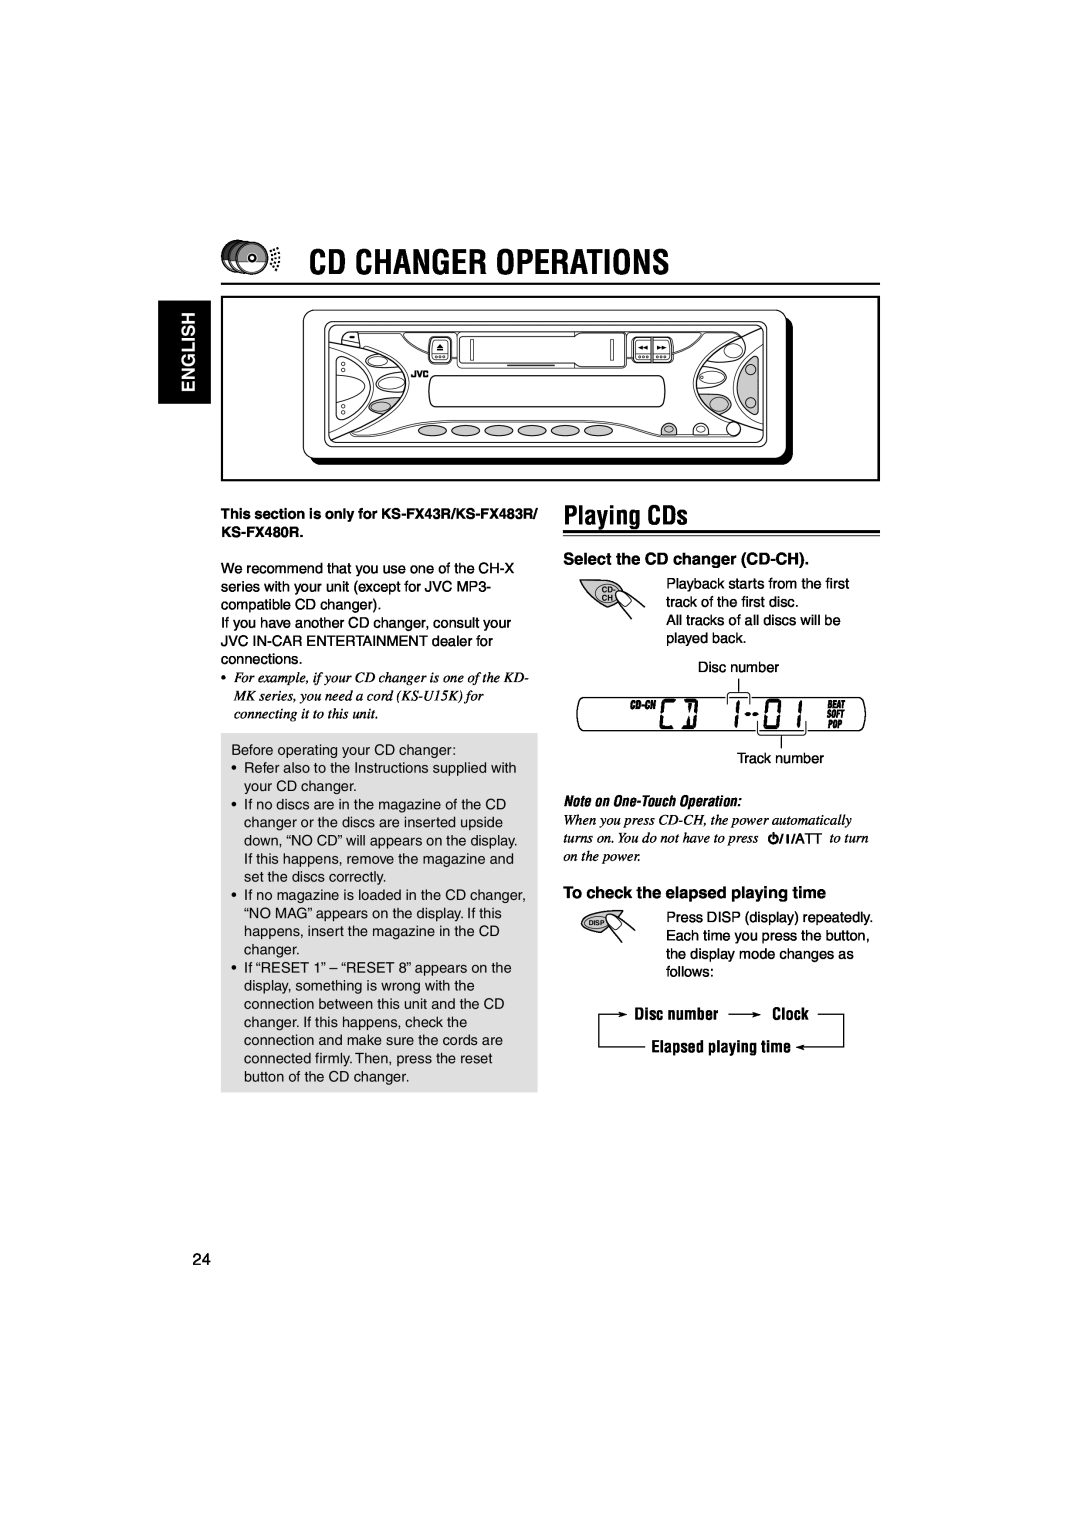 JVC KS-FX483R Cd Changer Operations, Playing CDs, English, Select the CD changer CD-CH, To check the elapsed playing time 